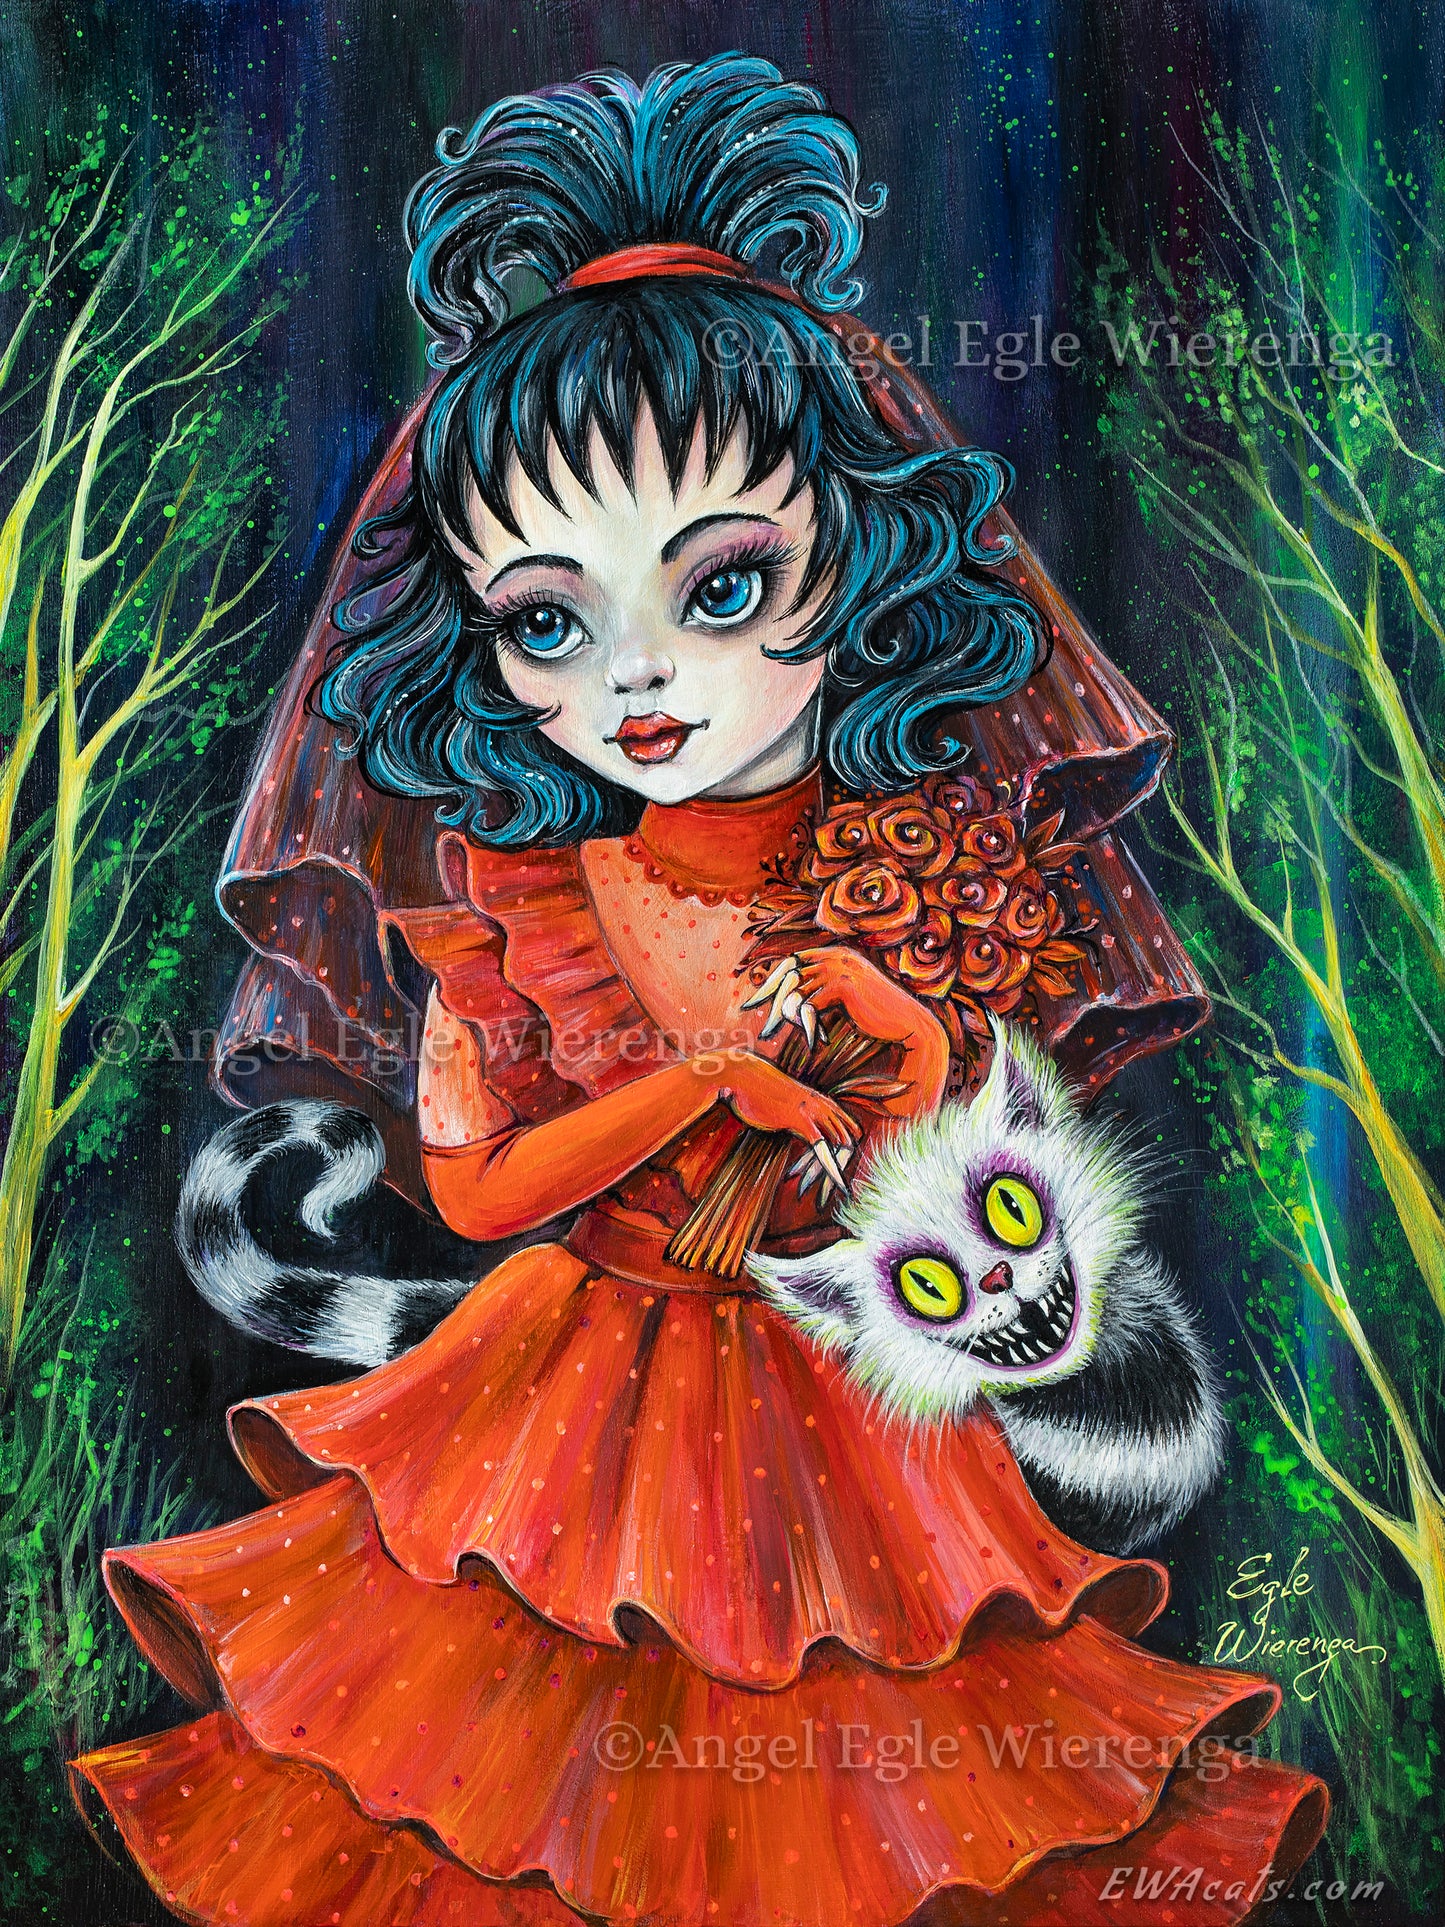 Art Print "Lydia and Her Beetle Kitty"